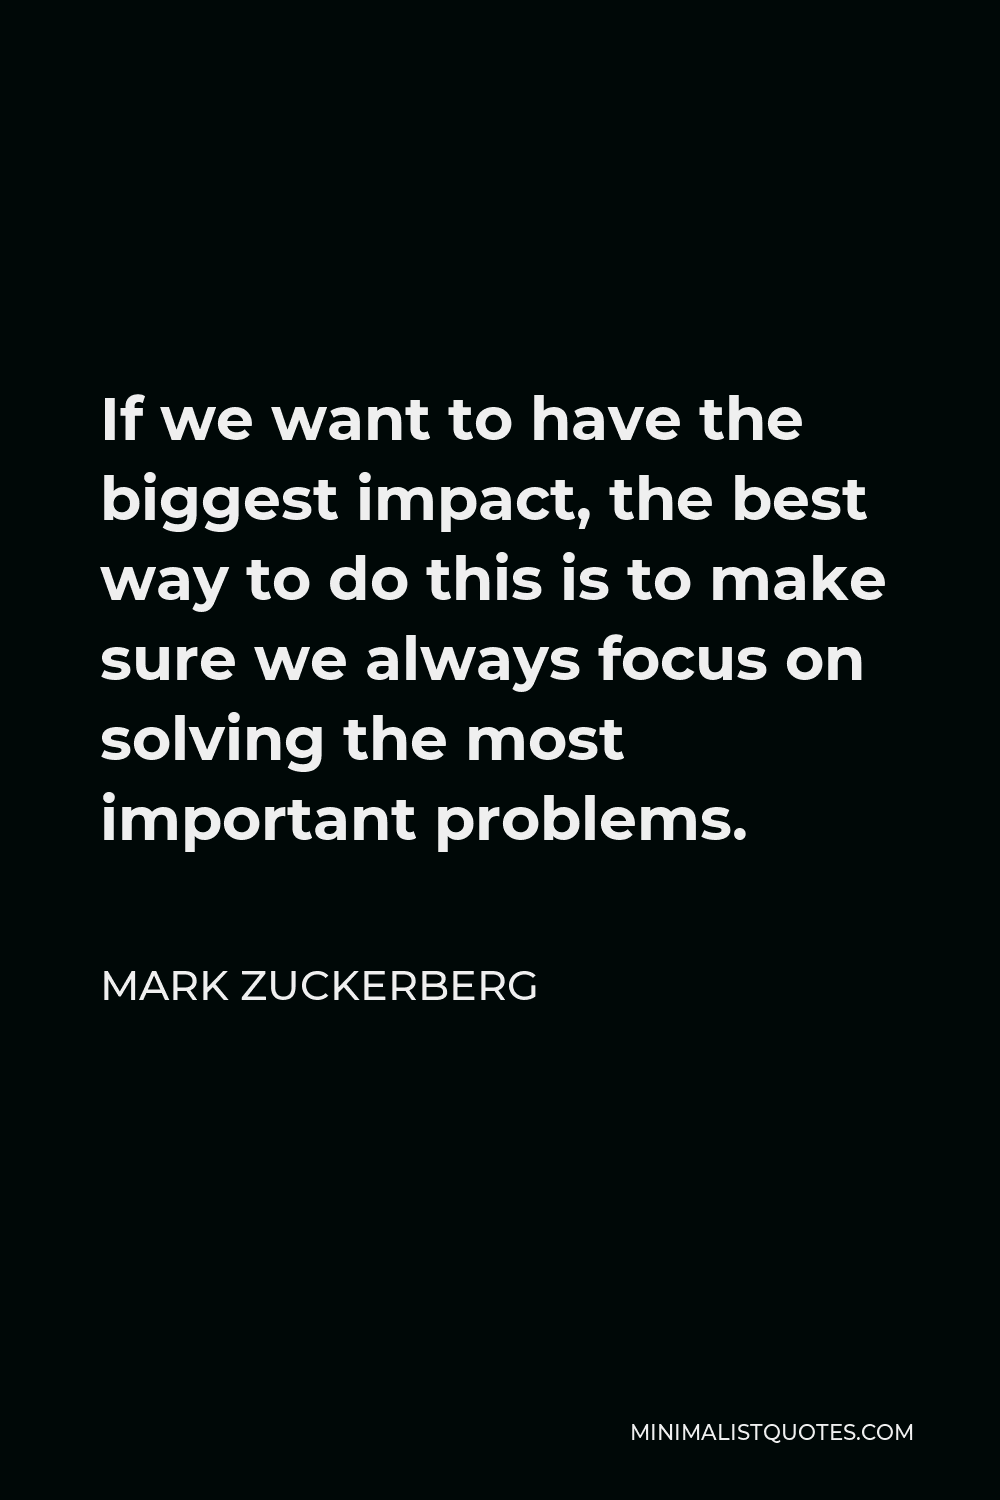 Mark Zuckerberg Quote - If we want to have the biggest impact, the best way to do this is to make sure we always focus on solving the most important problems.